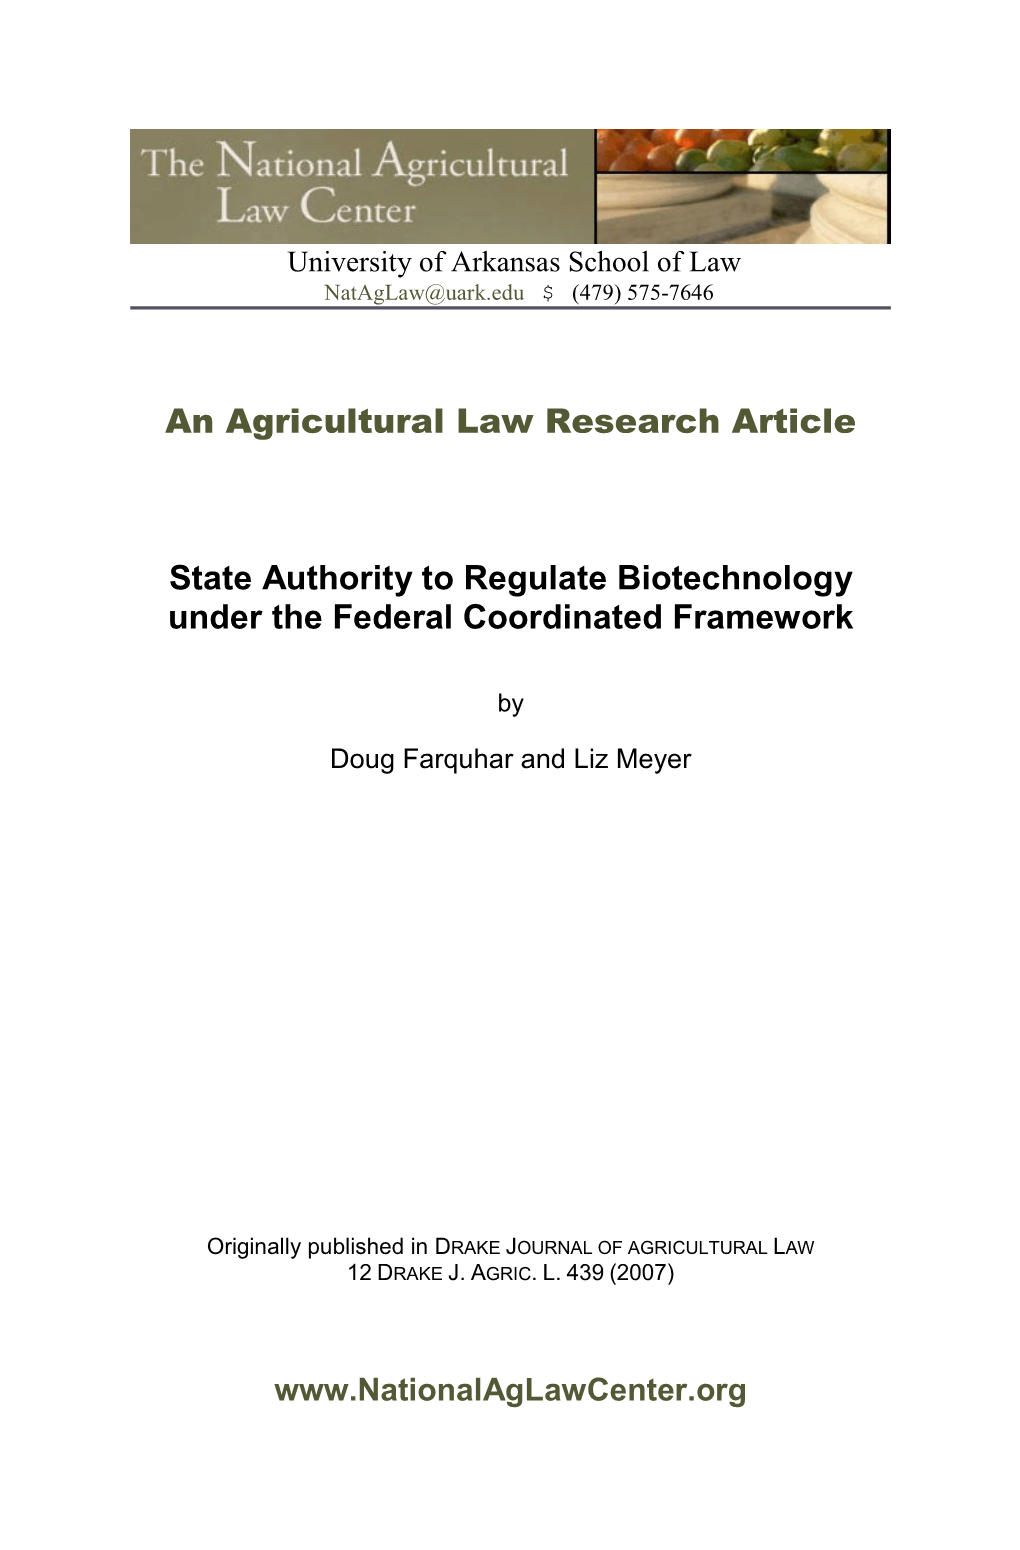 An Agricultural Law Research Article State Authority to Regulate Biotechnology Under the Federal Coordinated Framework